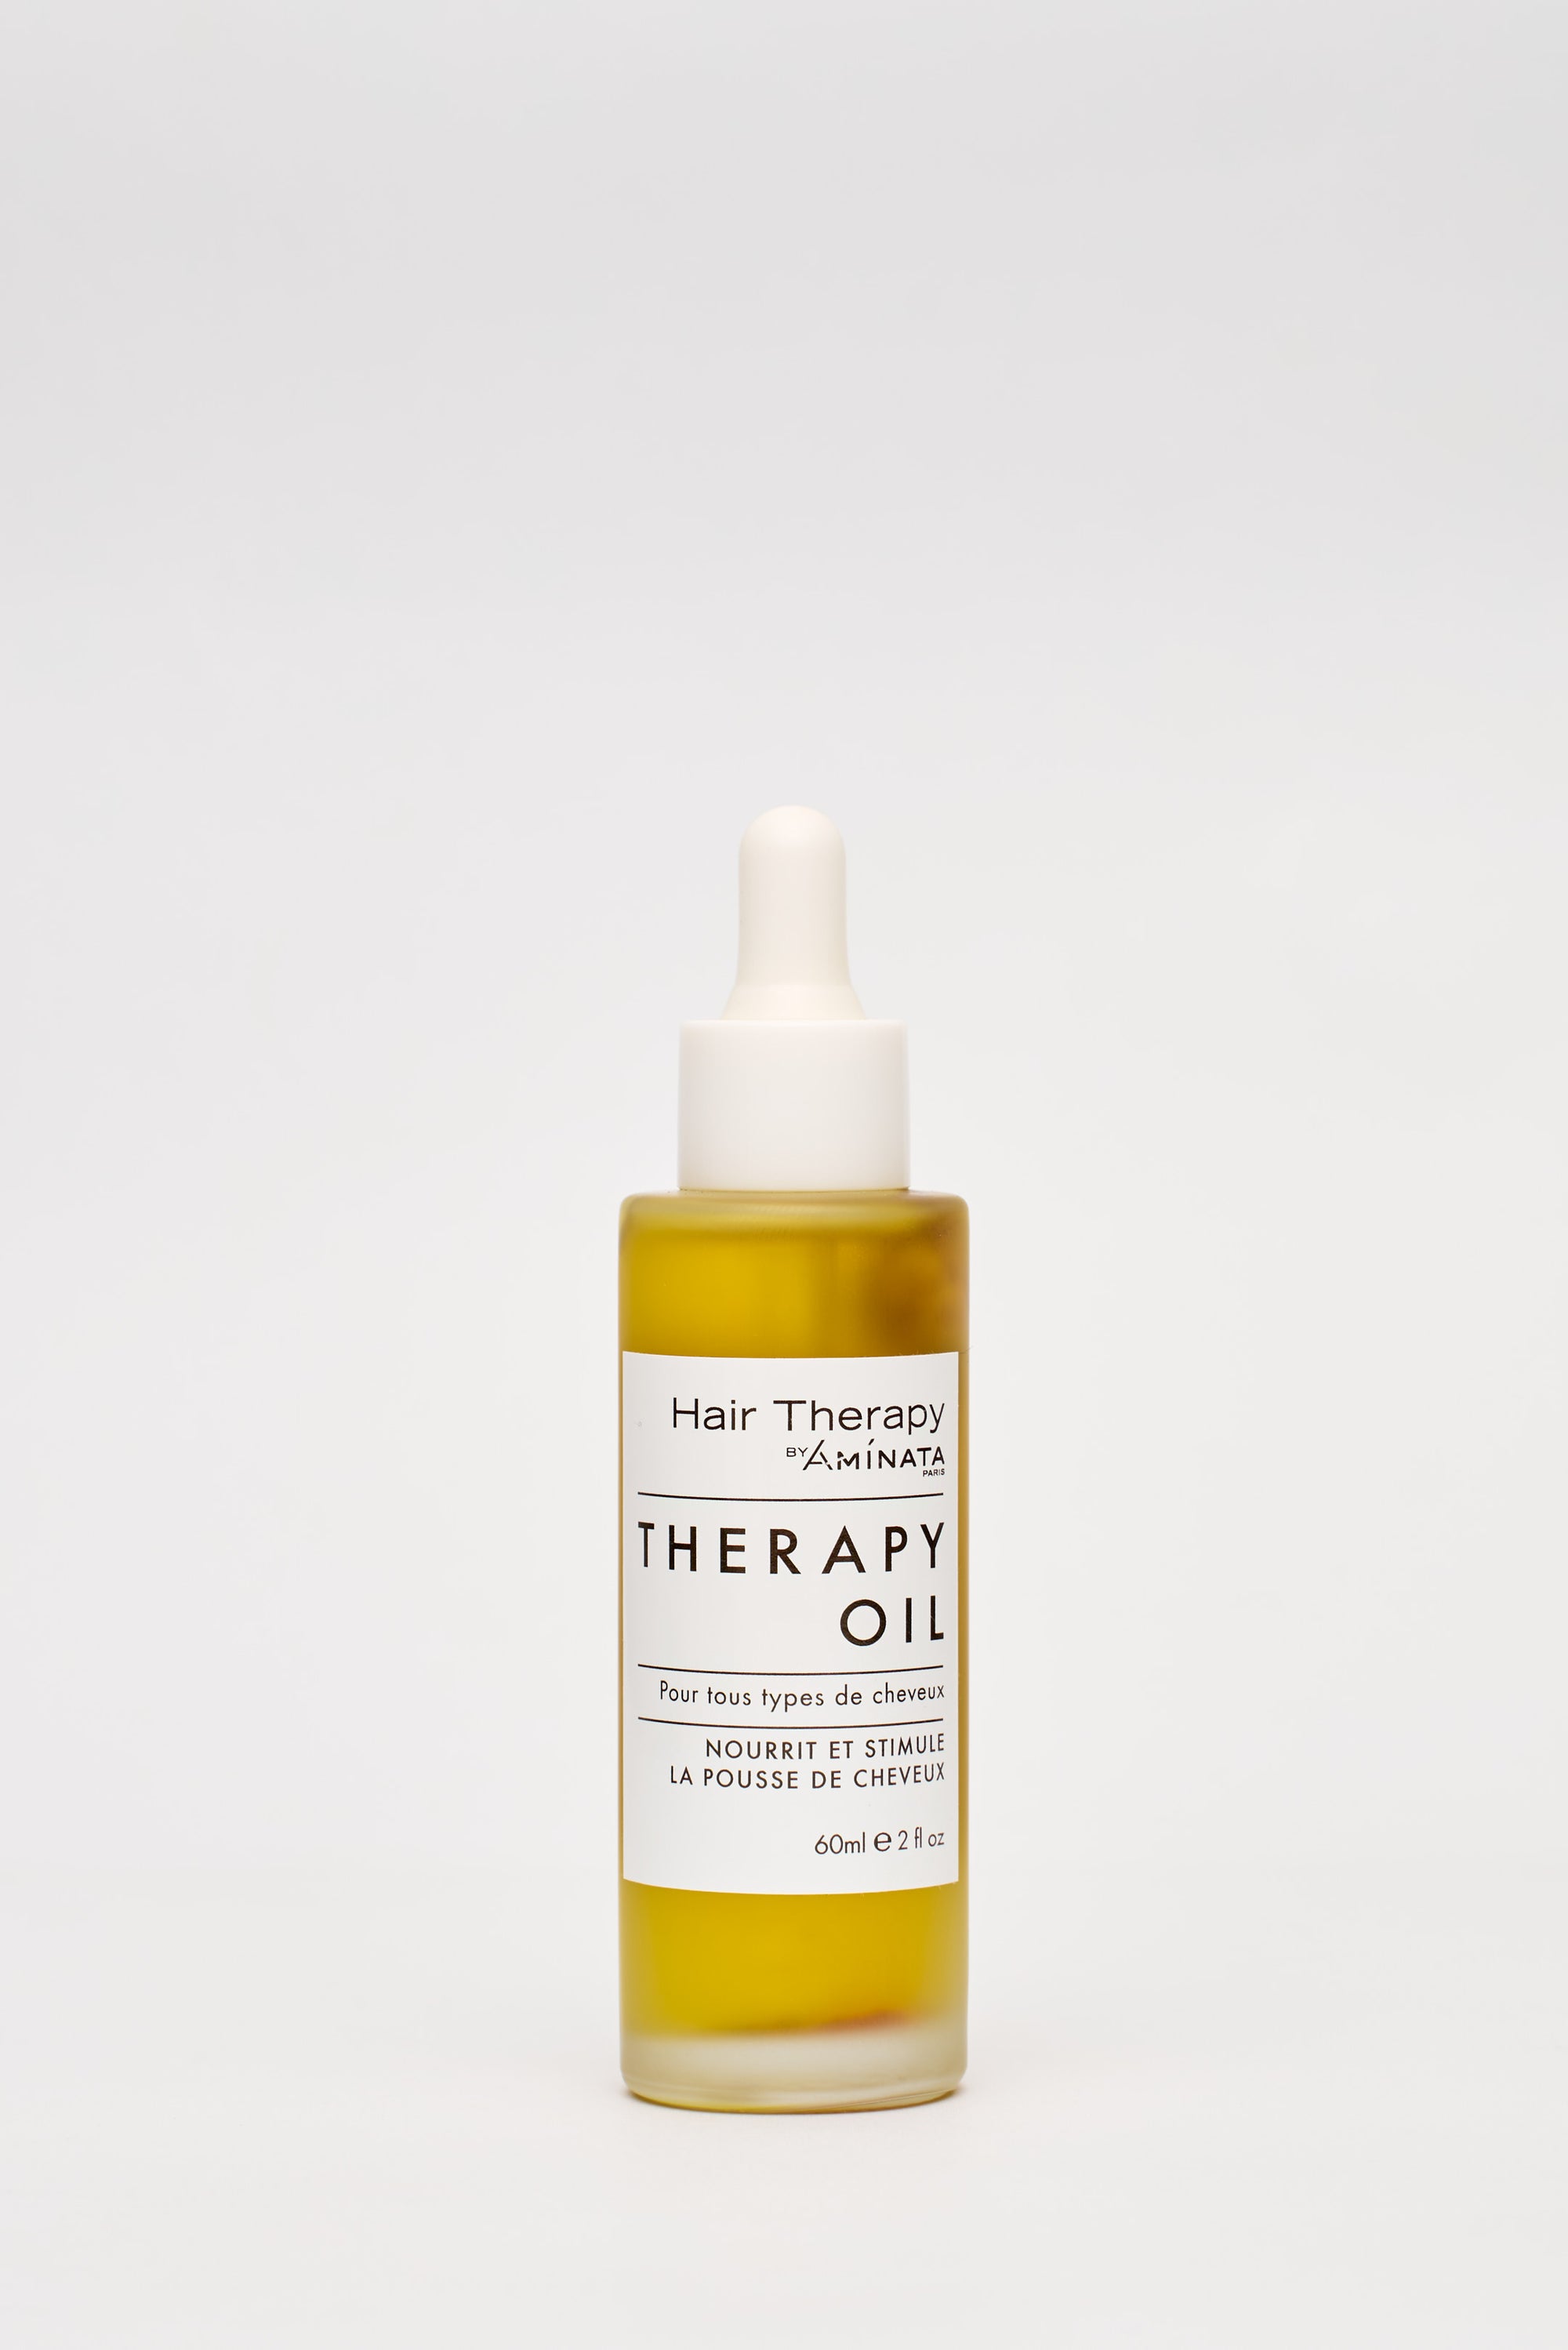 THERAPY OIL